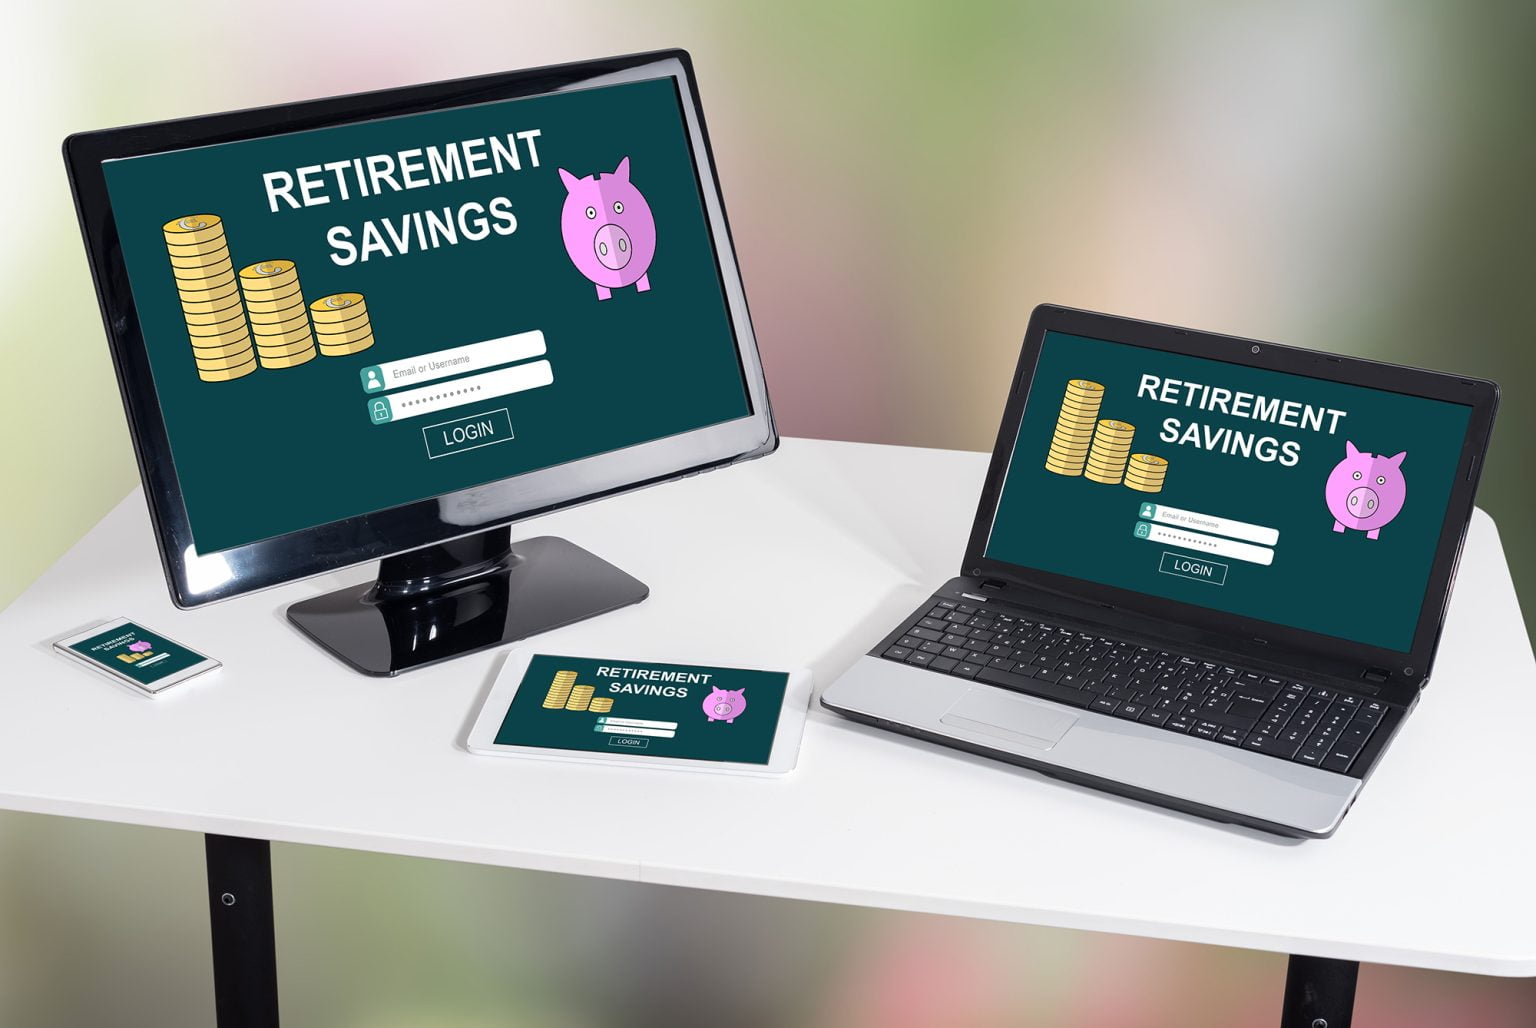 Retirement savings screens on different devices